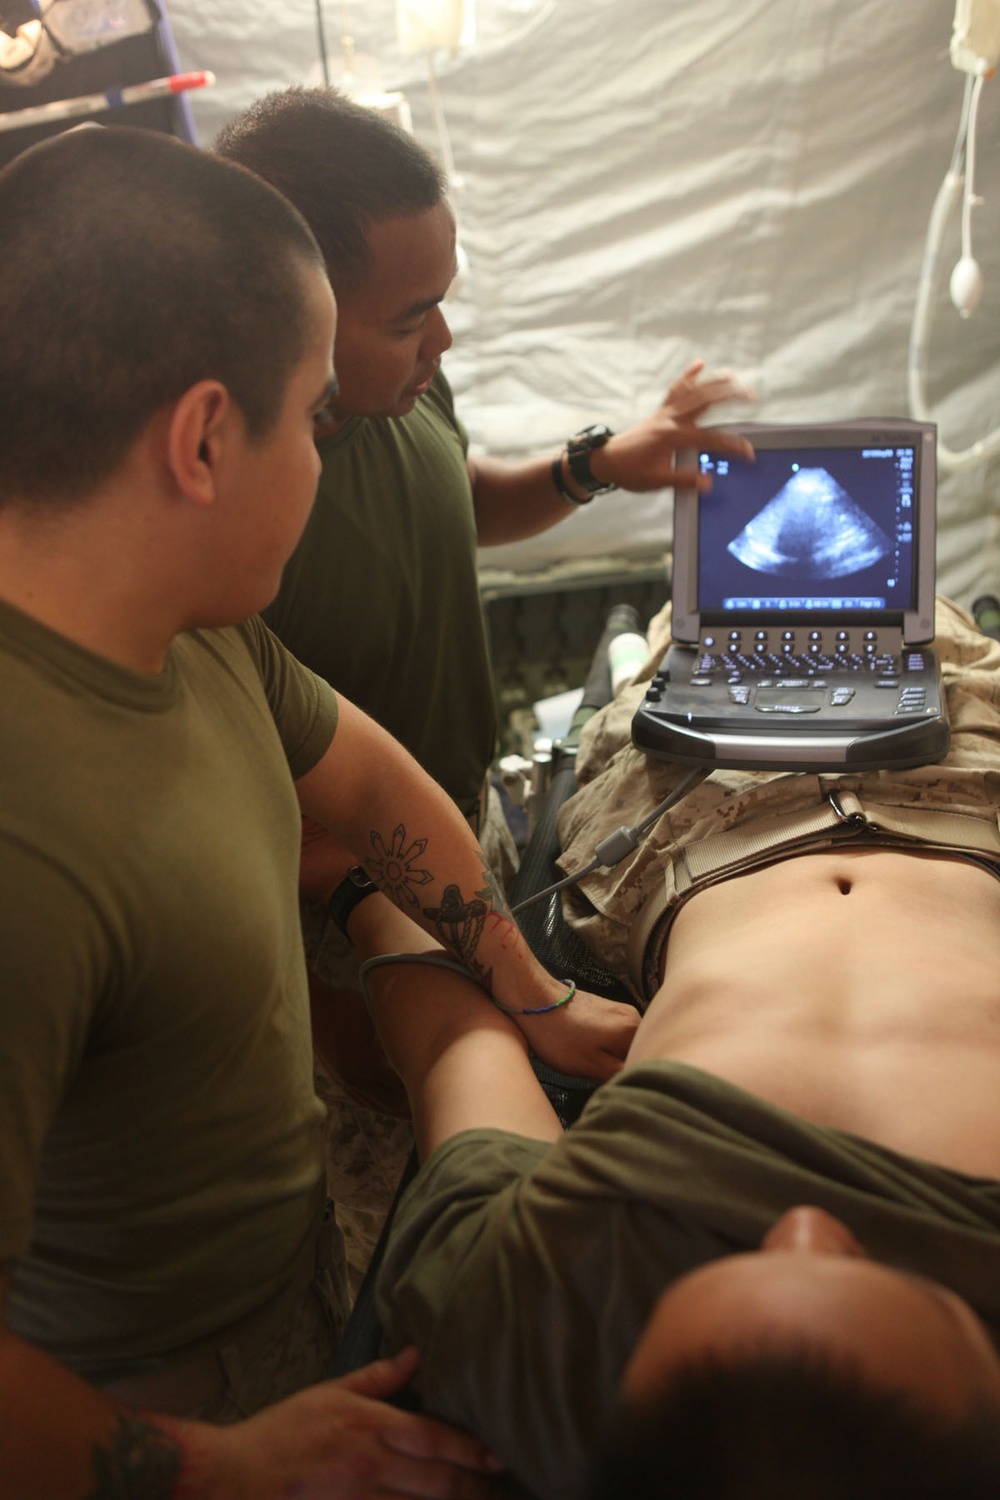 Corpsman build on knowledge of others